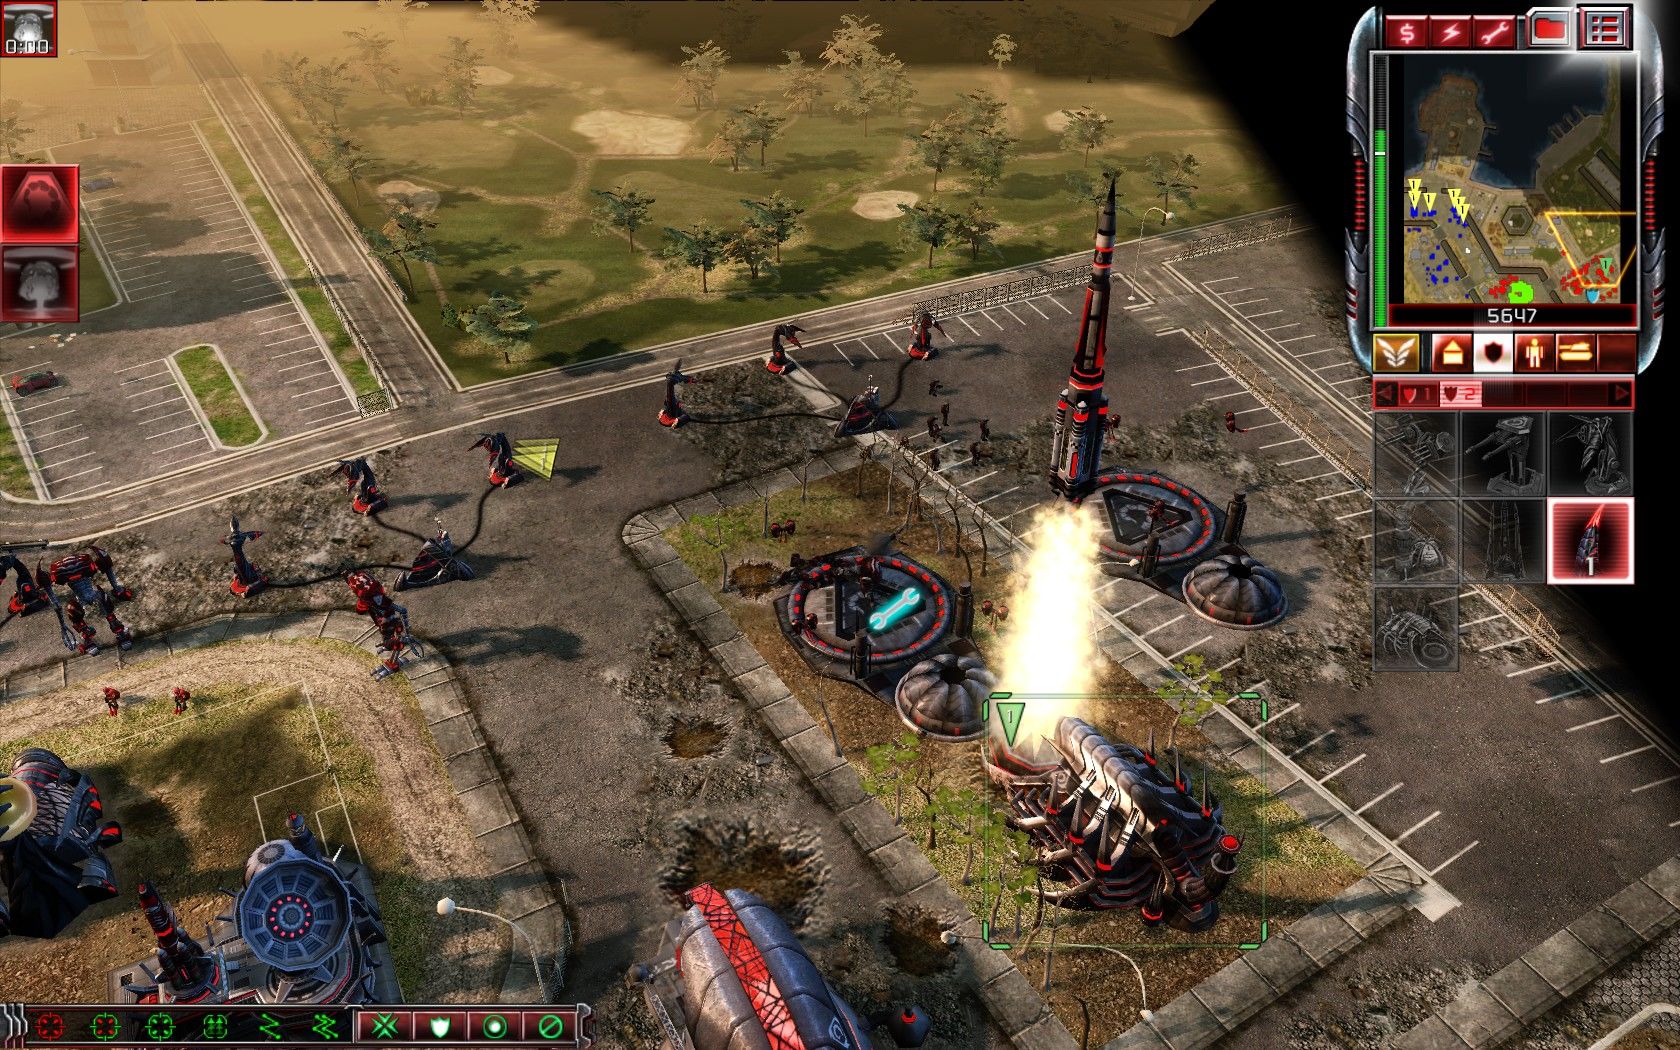 command and conquer 3